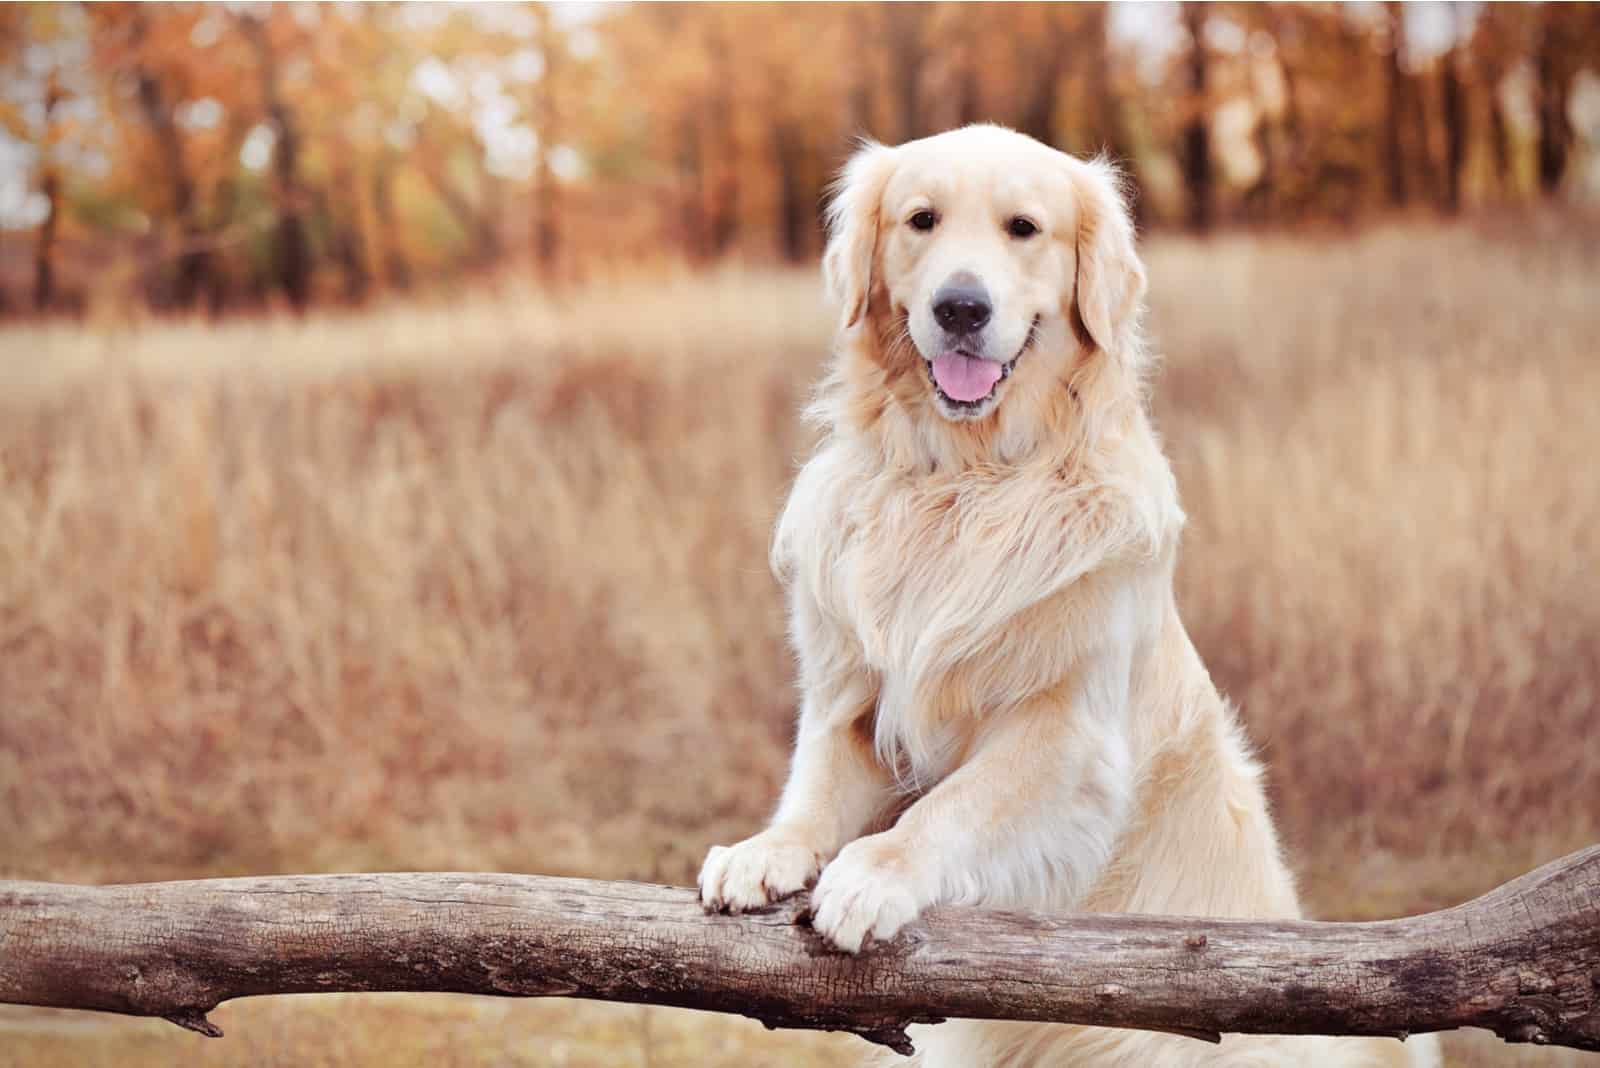 Golder retriever holding paws on a wooden fence